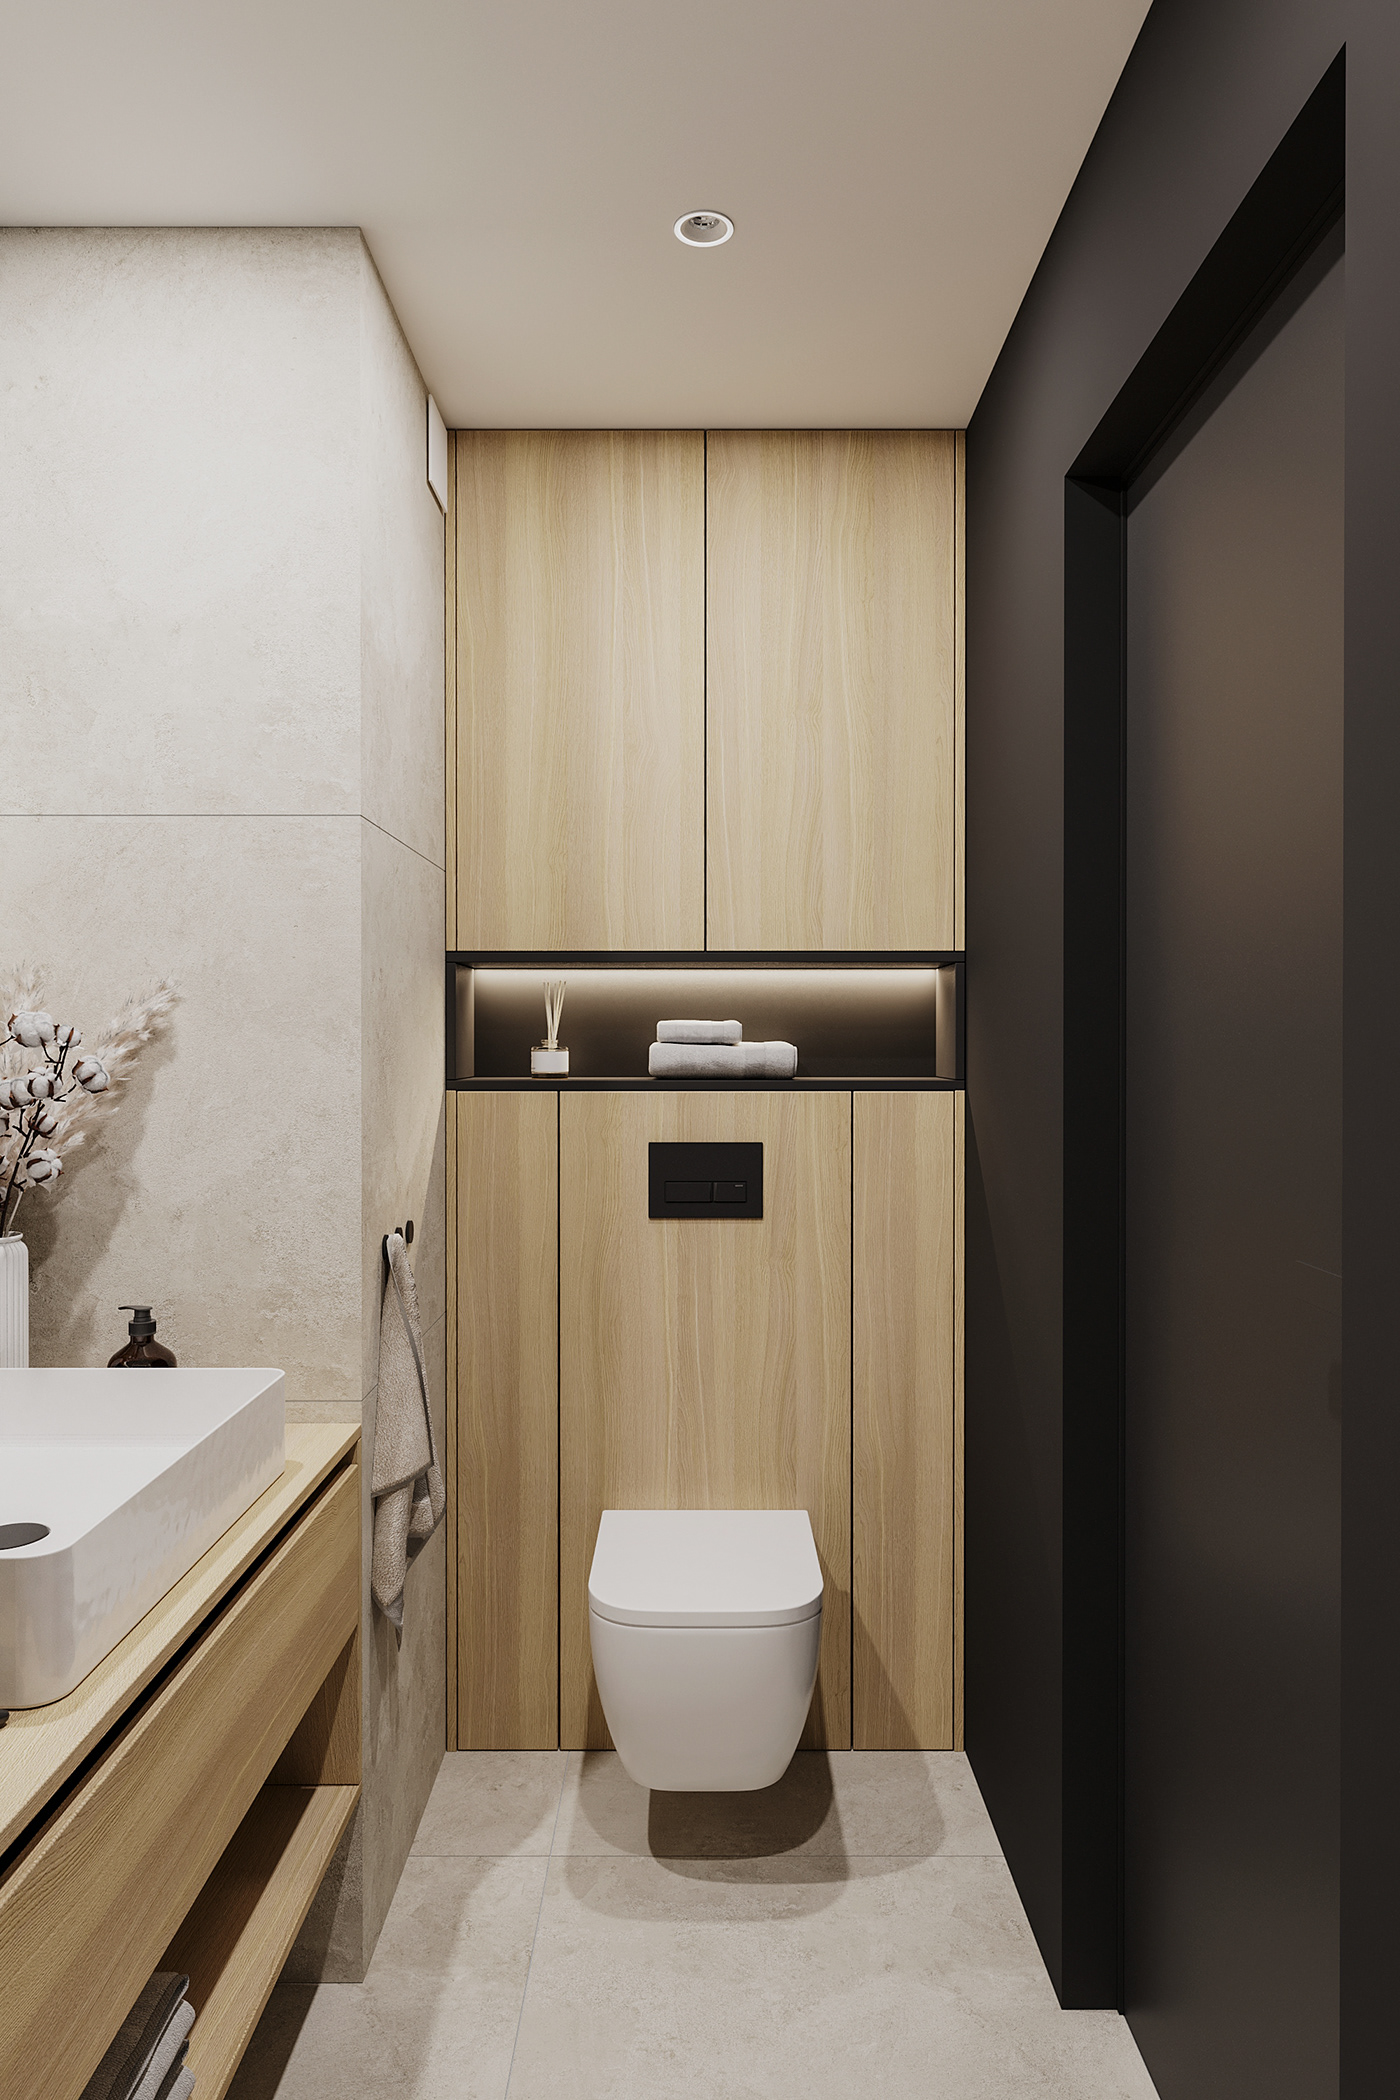 A toilet with a delicate structure and modern design that is compact and fits the space.